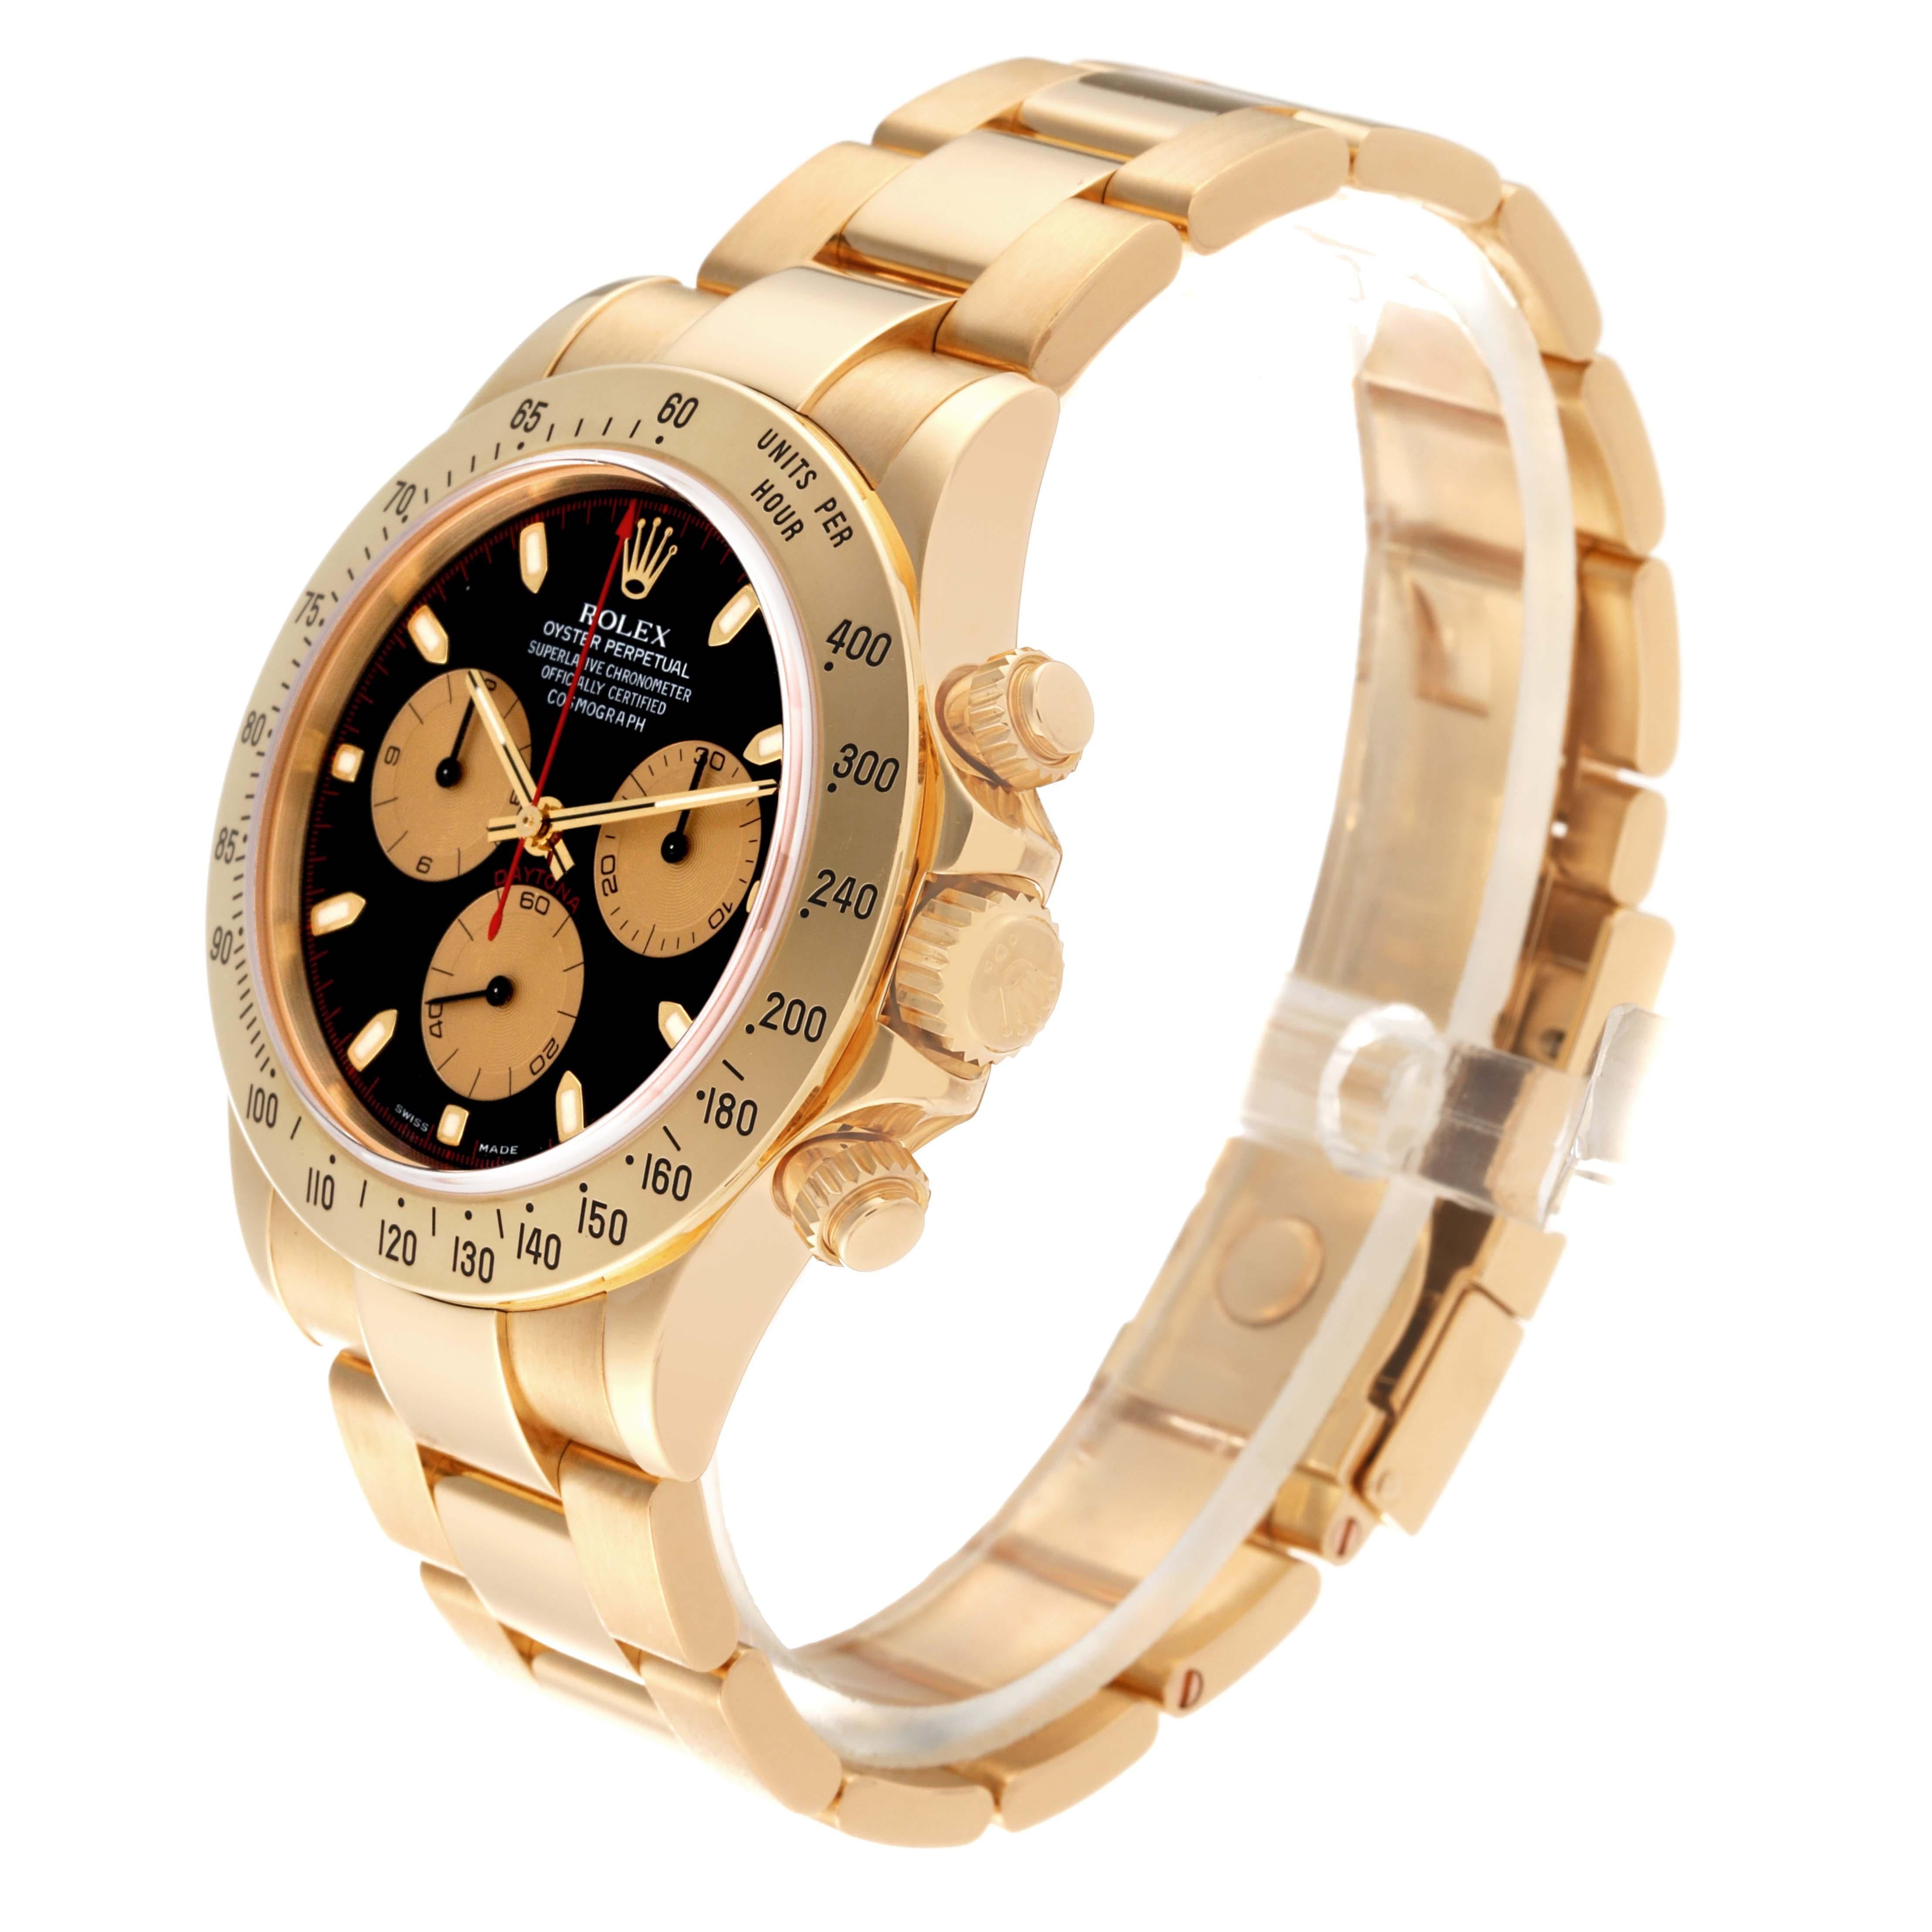 Rolex Cosmograph Daytona Yellow Gold Black Dial Mens Watch 116528 For Sale 5